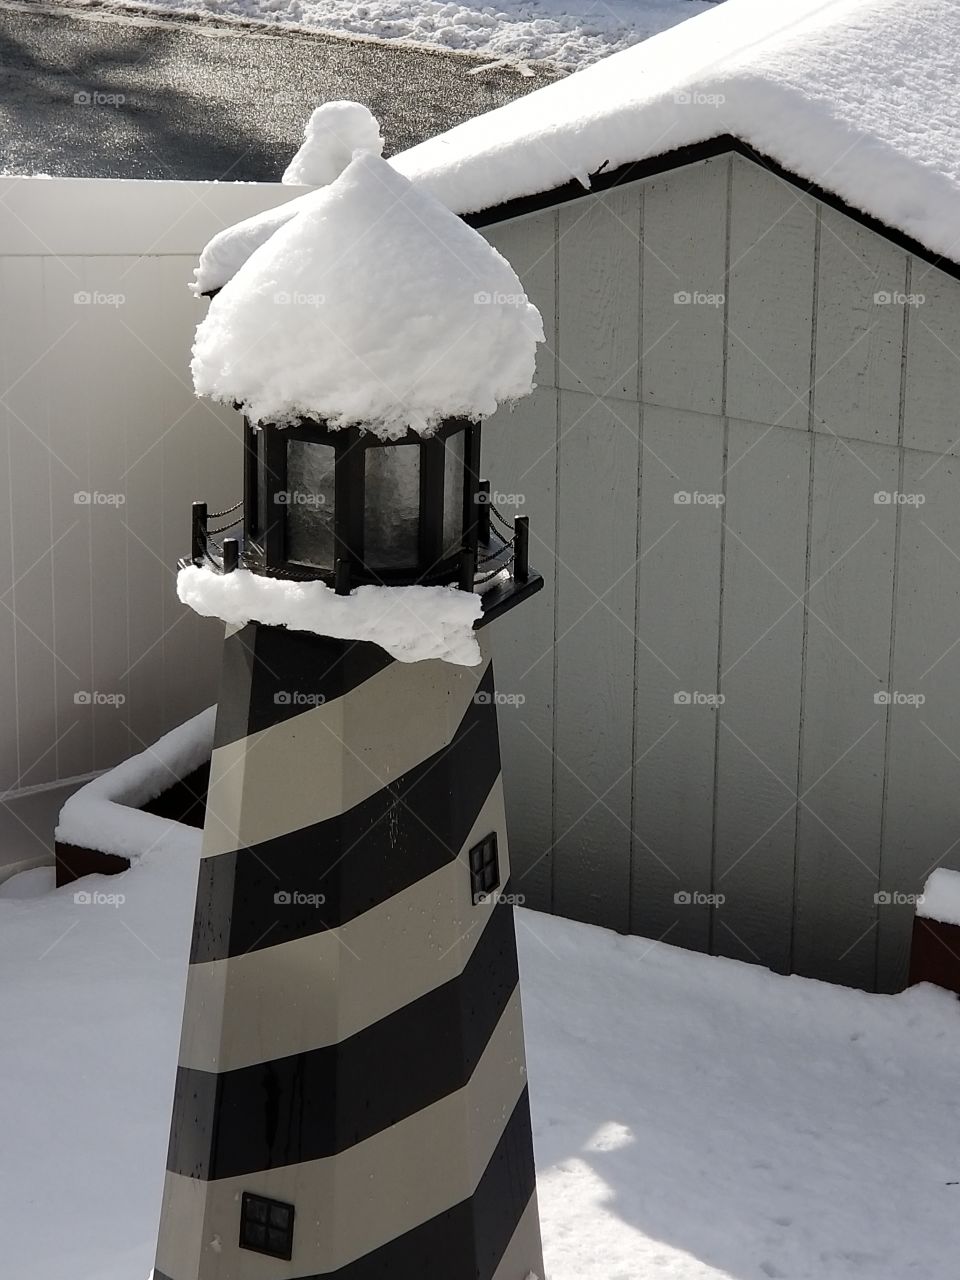 lighthouse in the snow